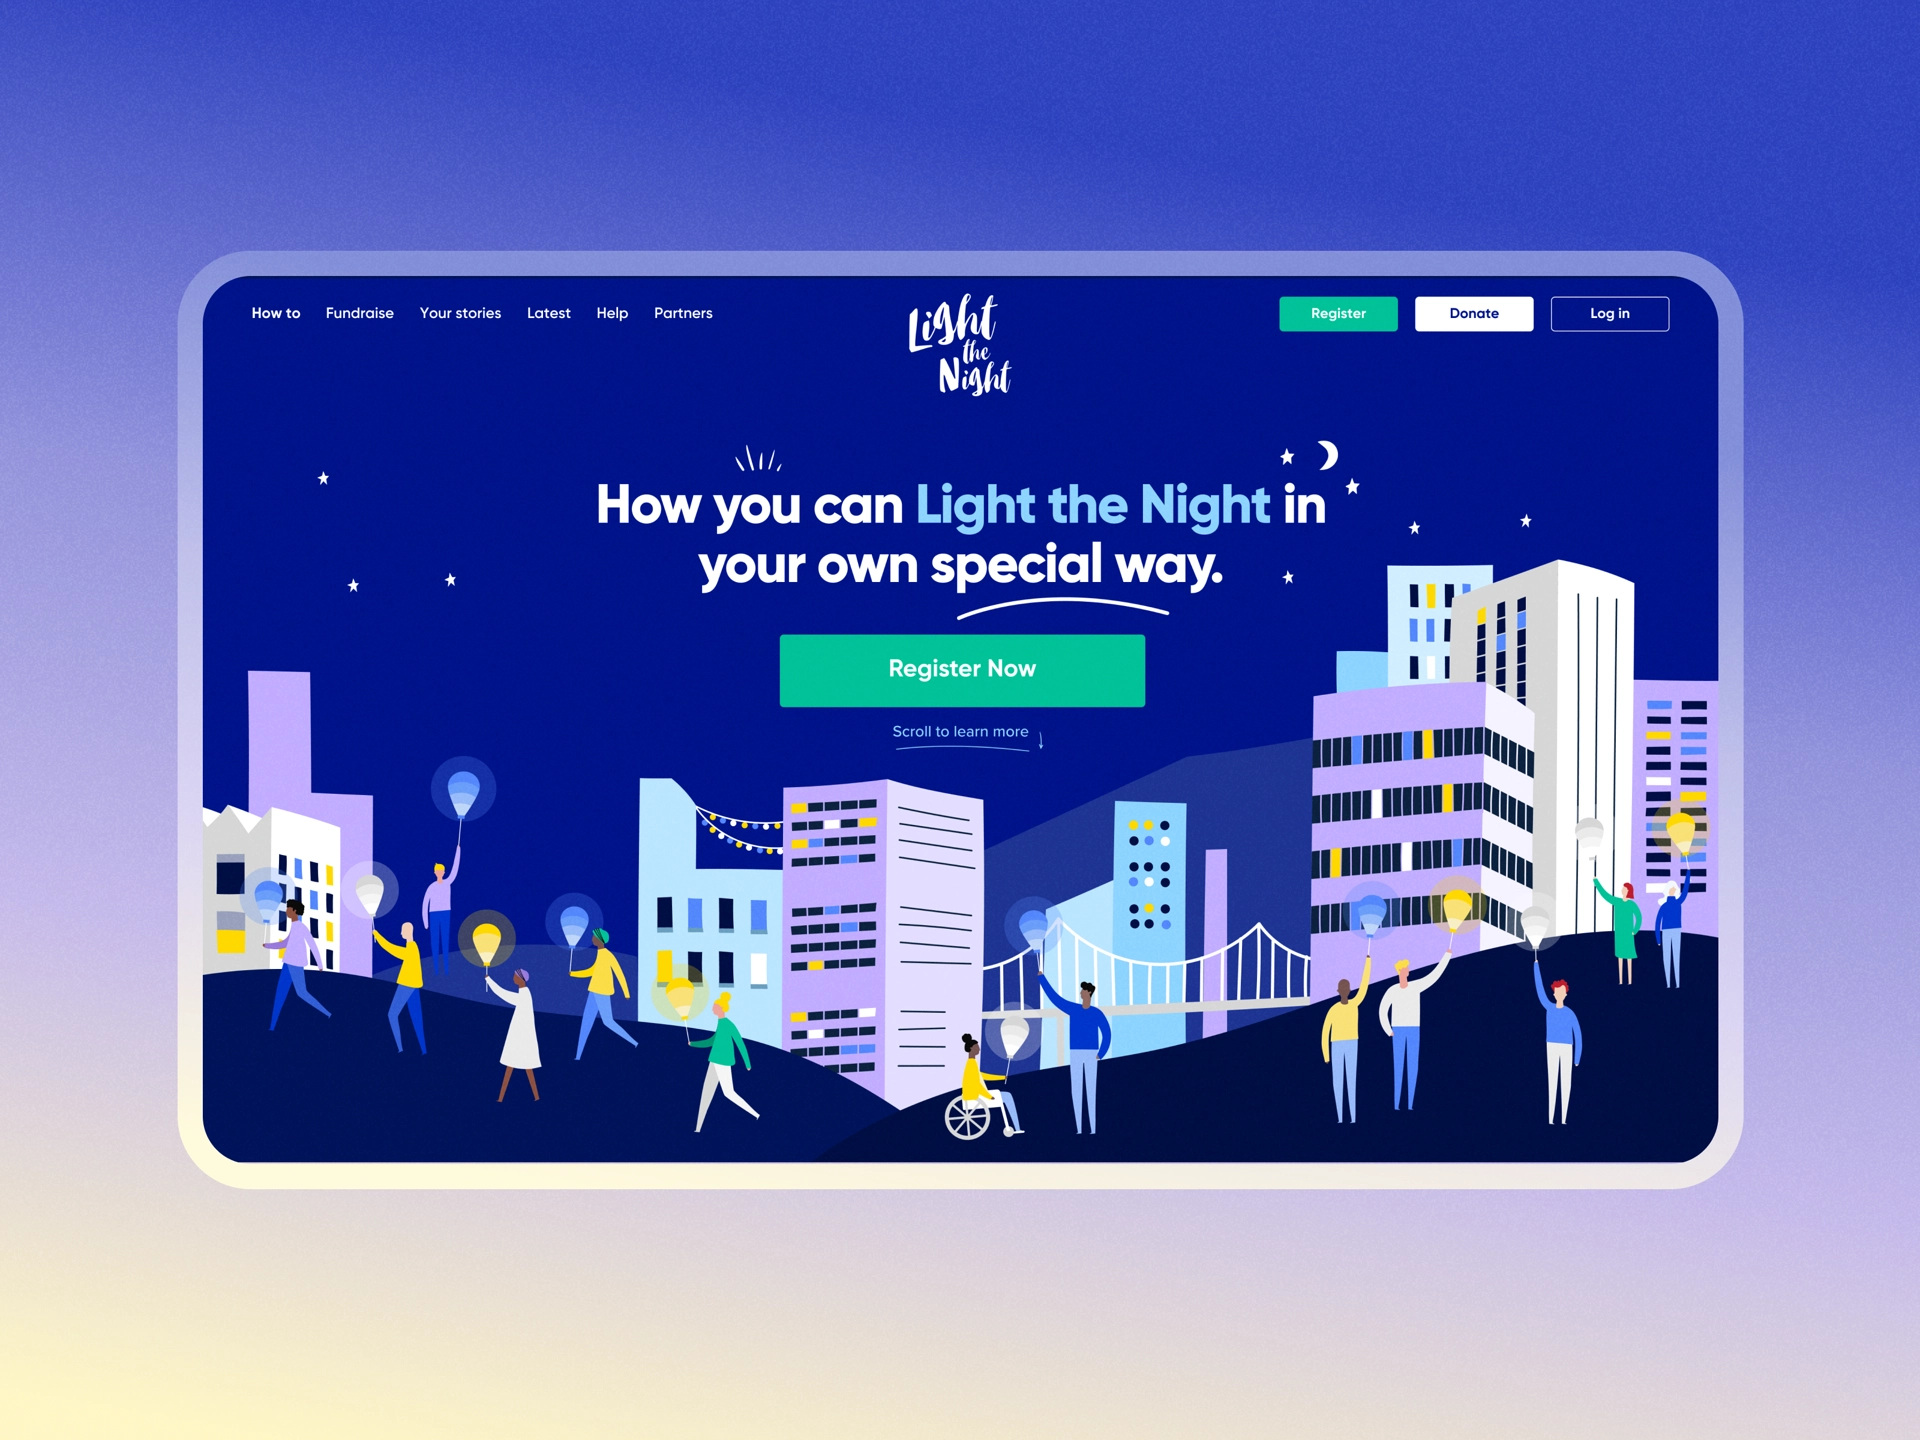 Light the Night website how to page